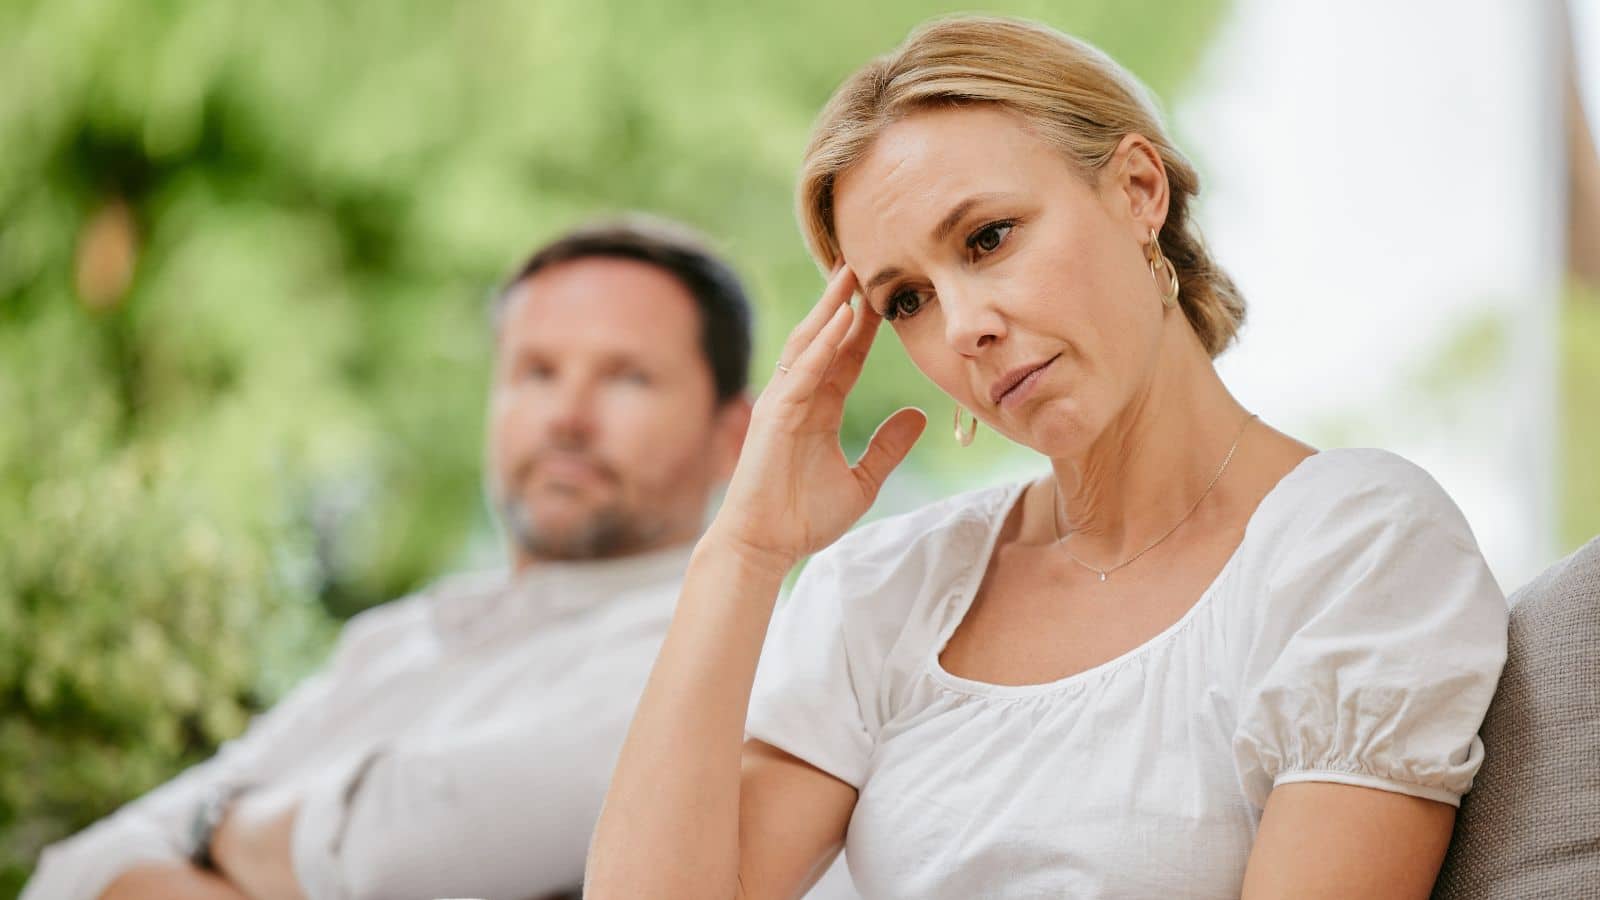 5 Common Mistakes in DIY Divorces and How to Avoid Them